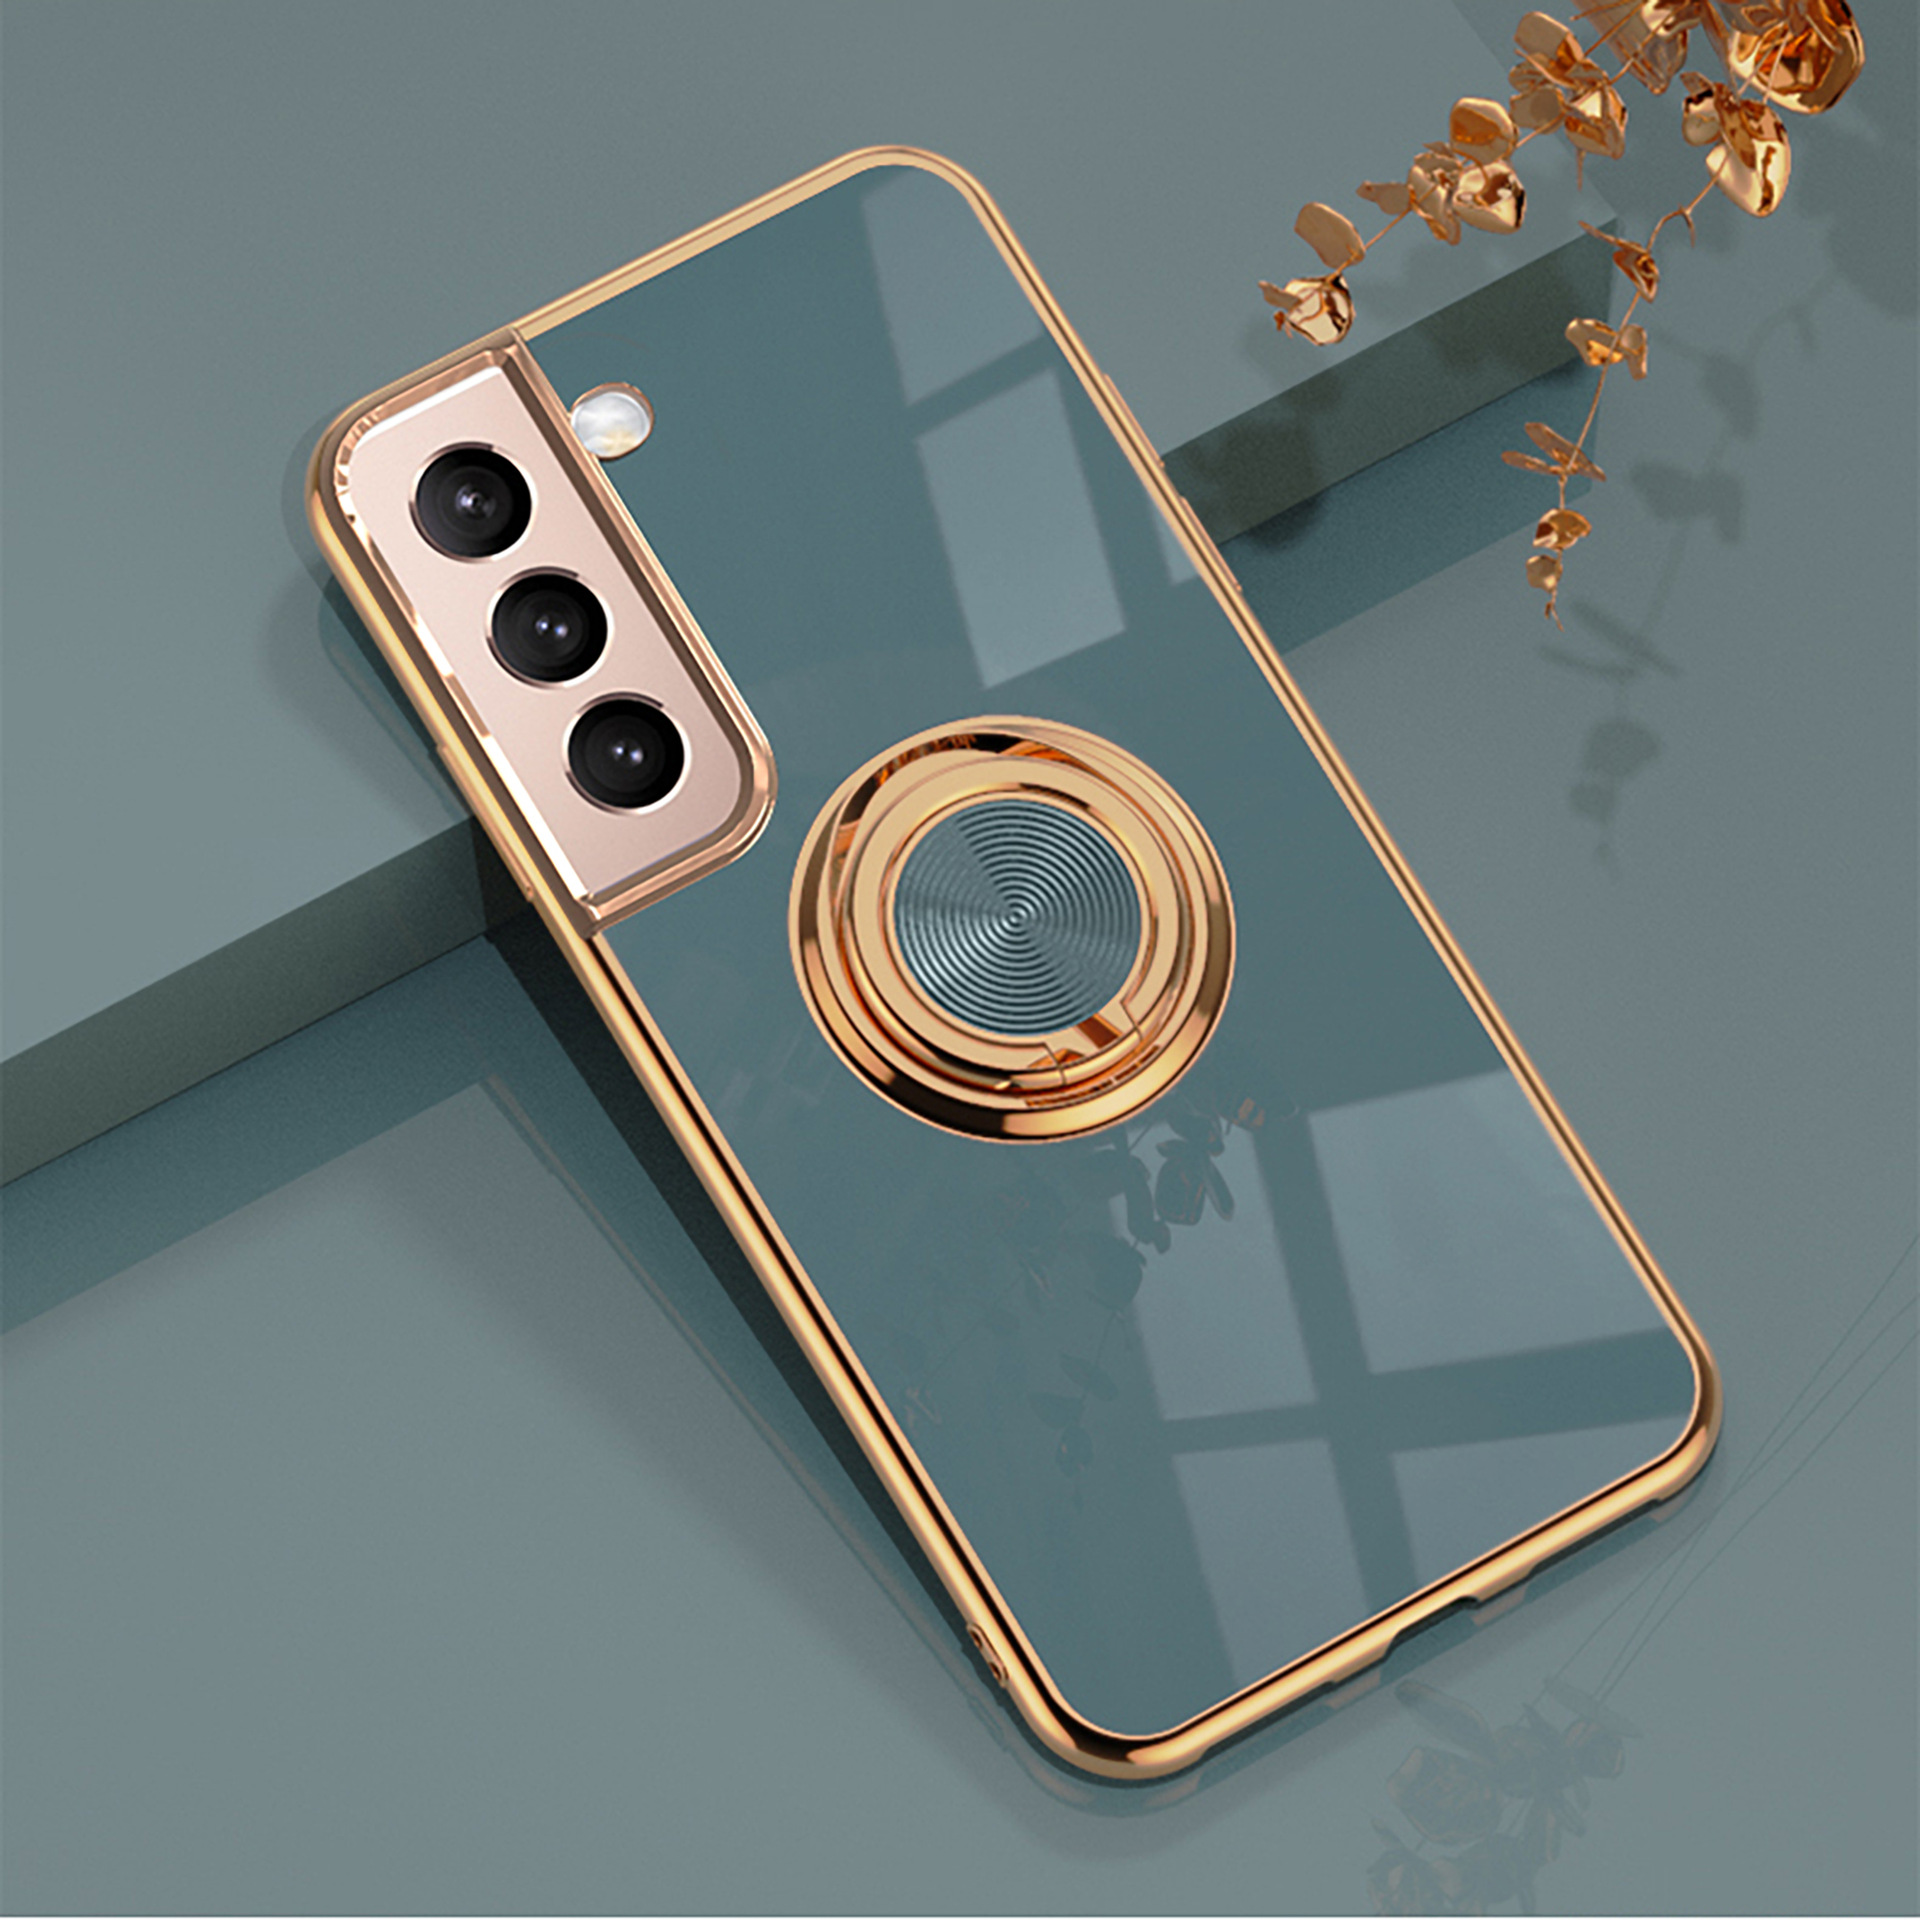 

Luxury Plating Cases For Samsung Galaxy Z Flip 3 S10 Plus S20 FE S21 Ultra Note 20 10 9 Note10 A52 A72 A42 4G 5G Ring Holder Phone Covers, Black